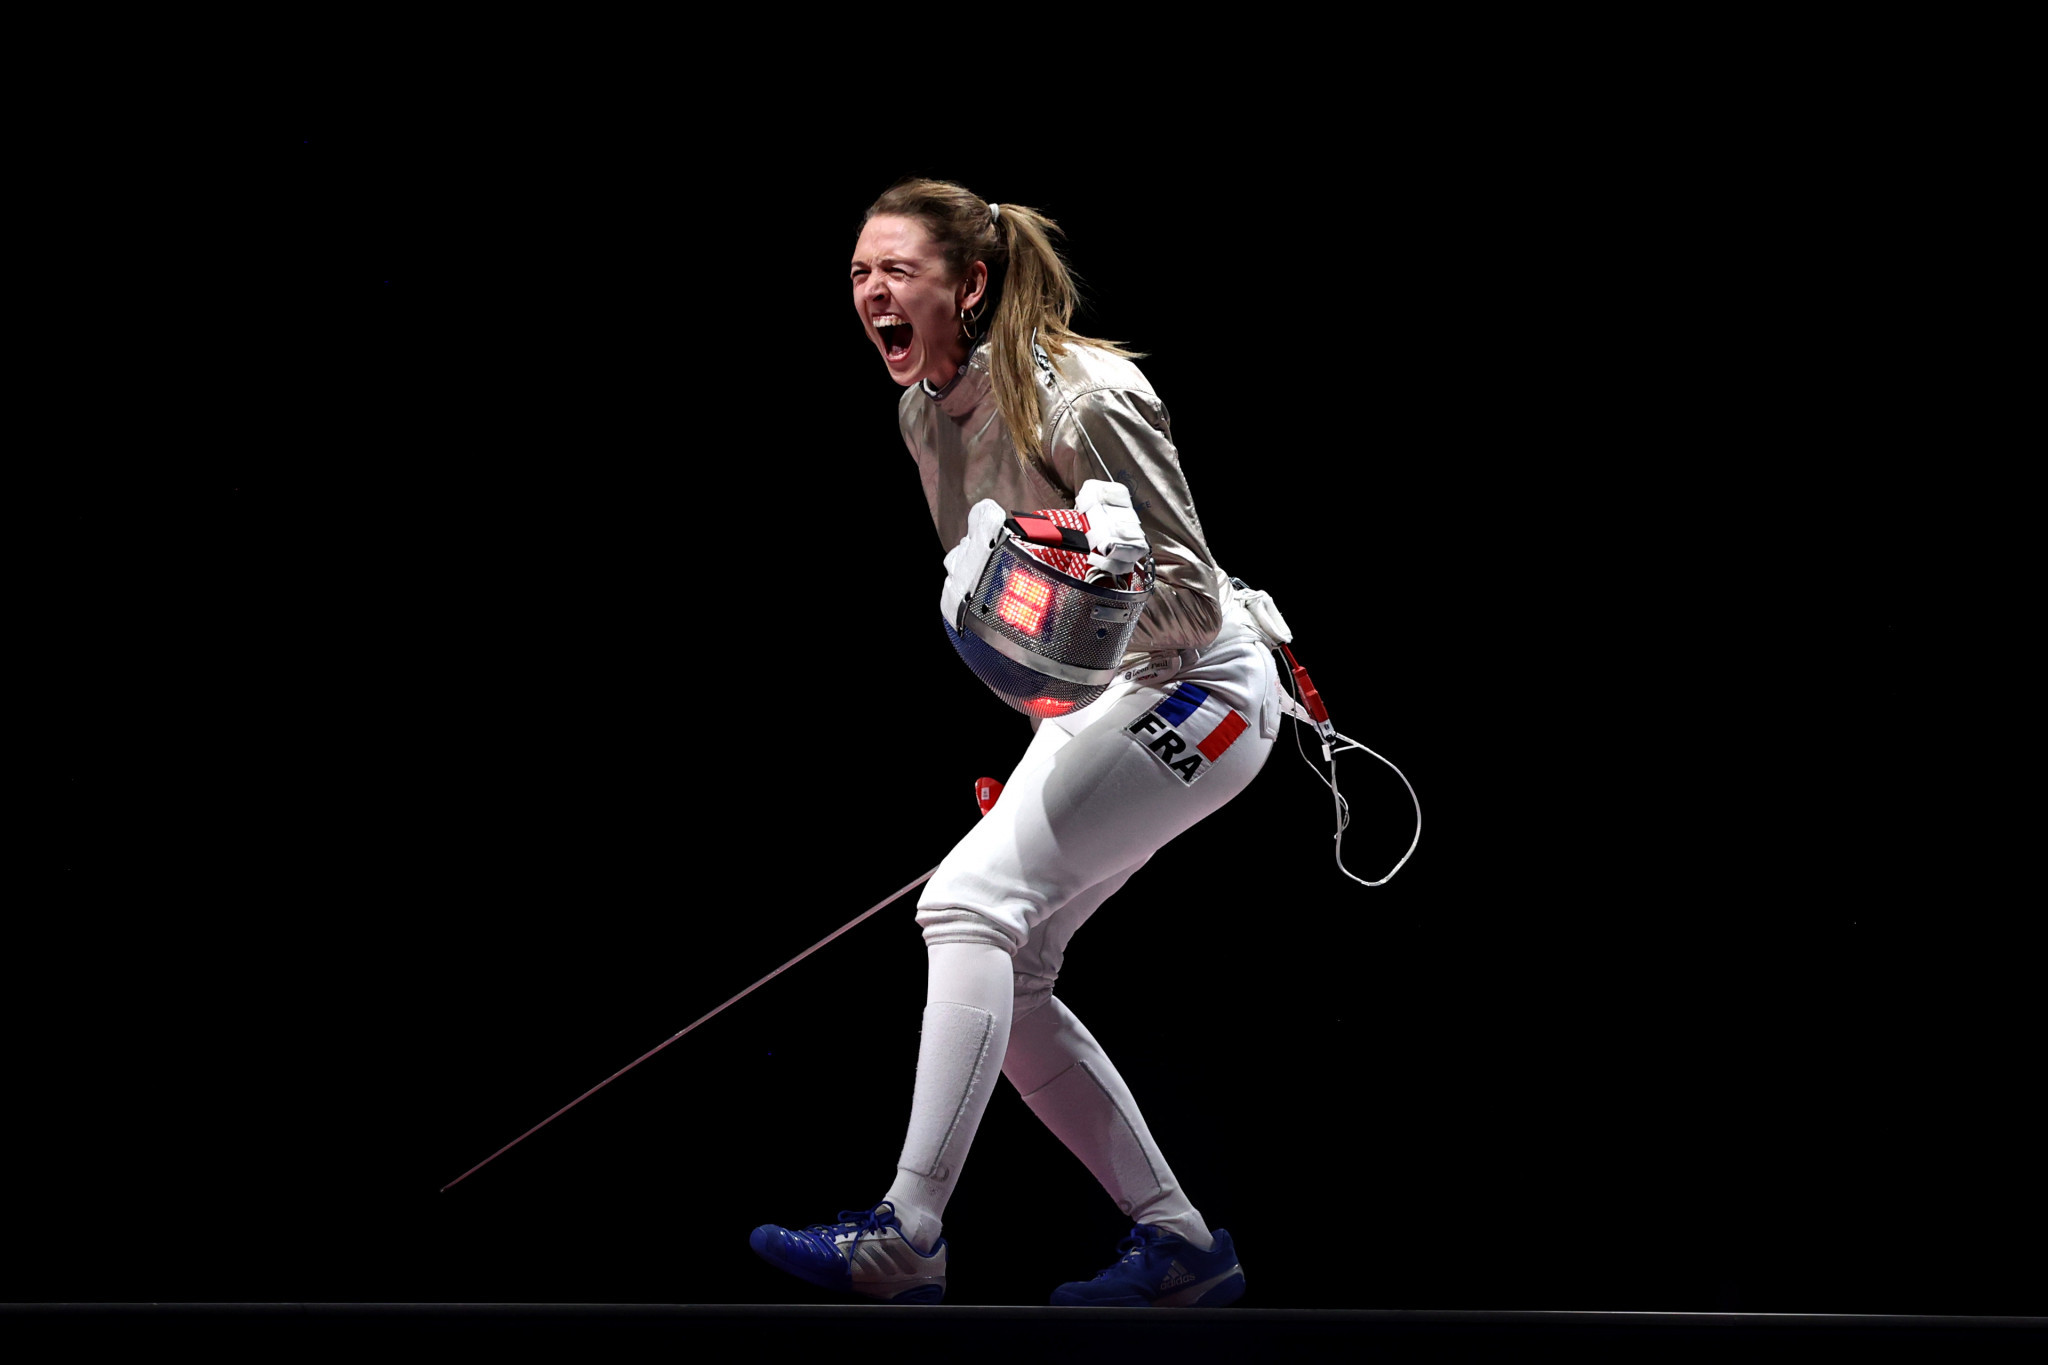 Olympic medallist Apithy-Brunet leads entries for women's sabre FIE World Cup